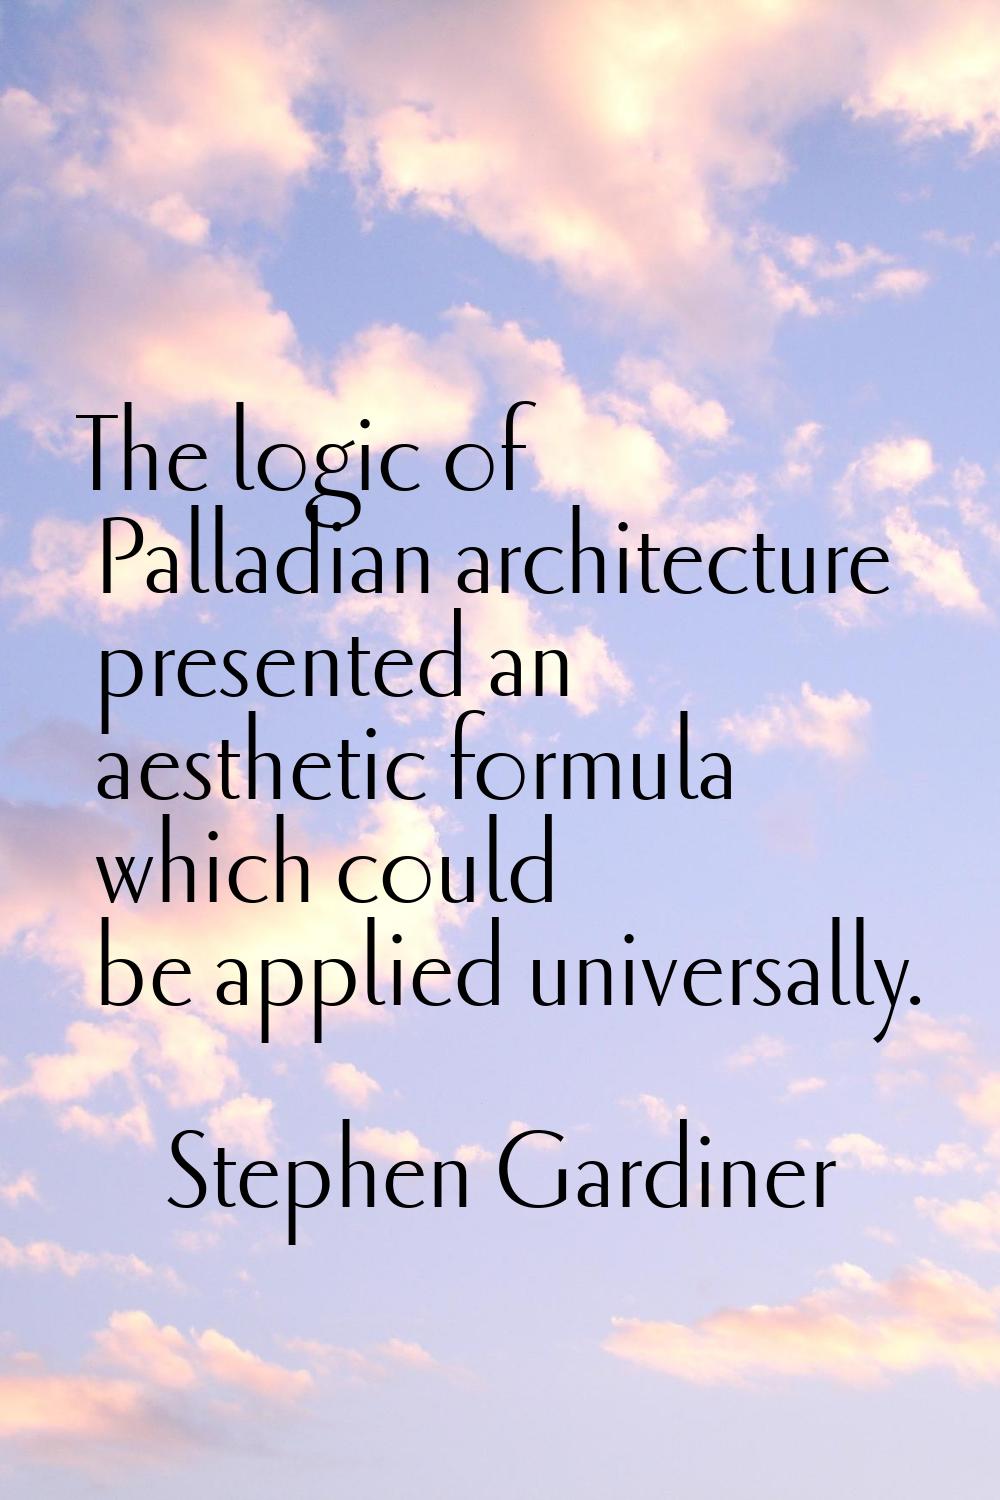 The logic of Palladian architecture presented an aesthetic formula which could be applied universal